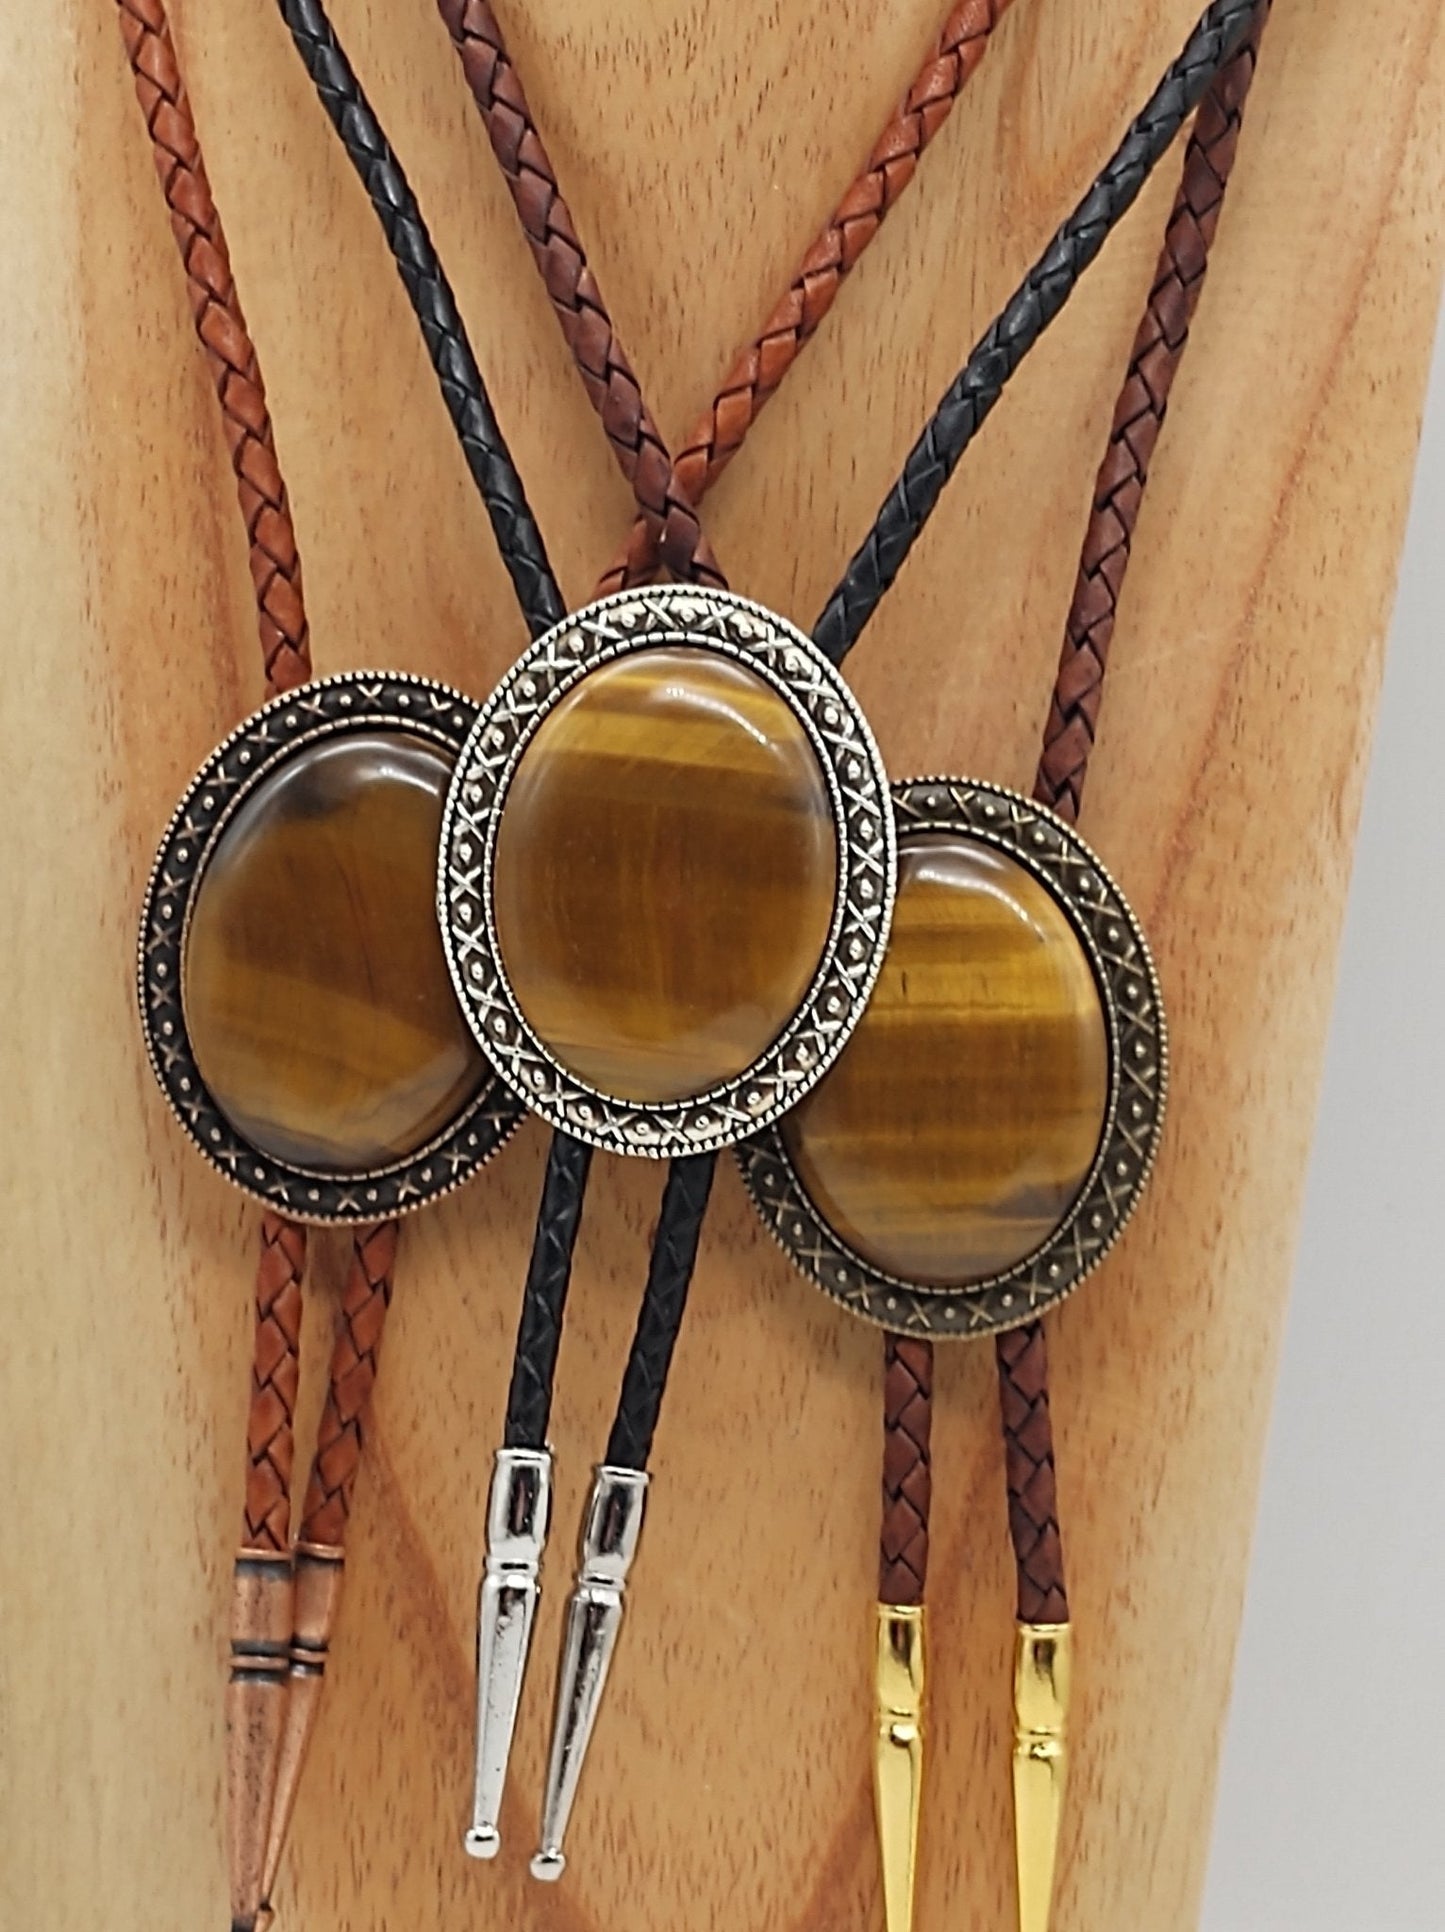 Reserved Yellowstone Bolo Tie with Brown Tiger's Eye Jasper in Gold Tone Metal - Folks On The Edge